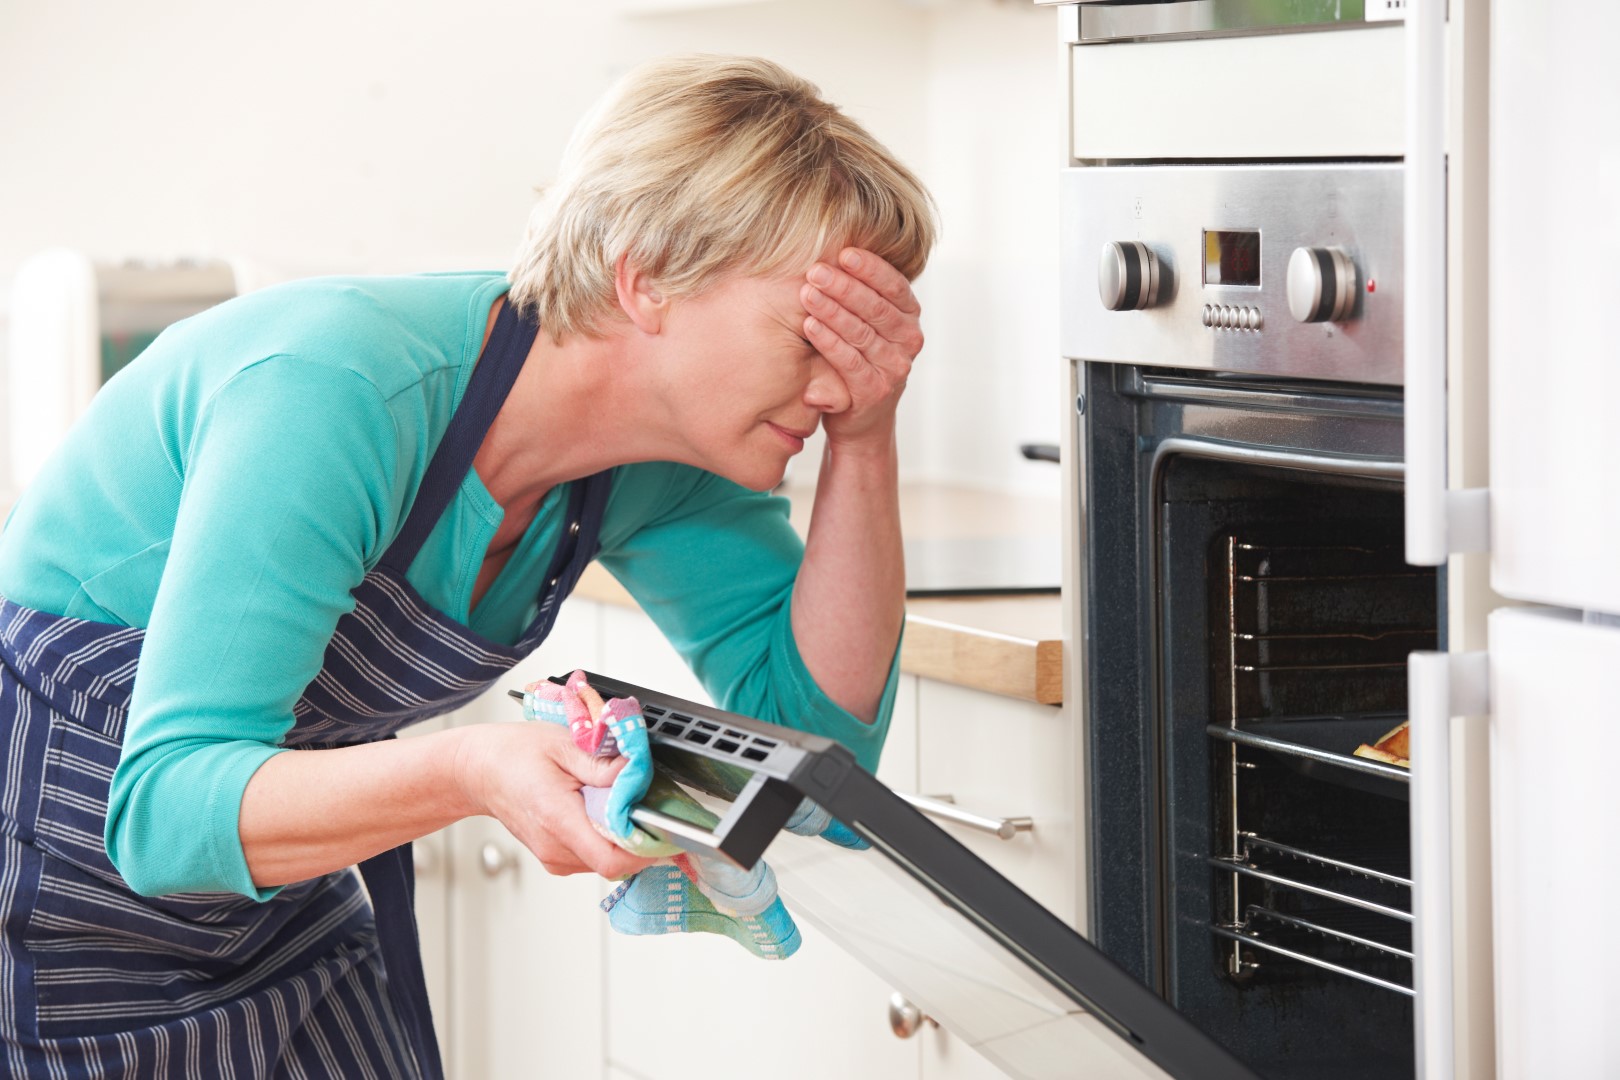 3 Oven Issues That Prove You Need a New One